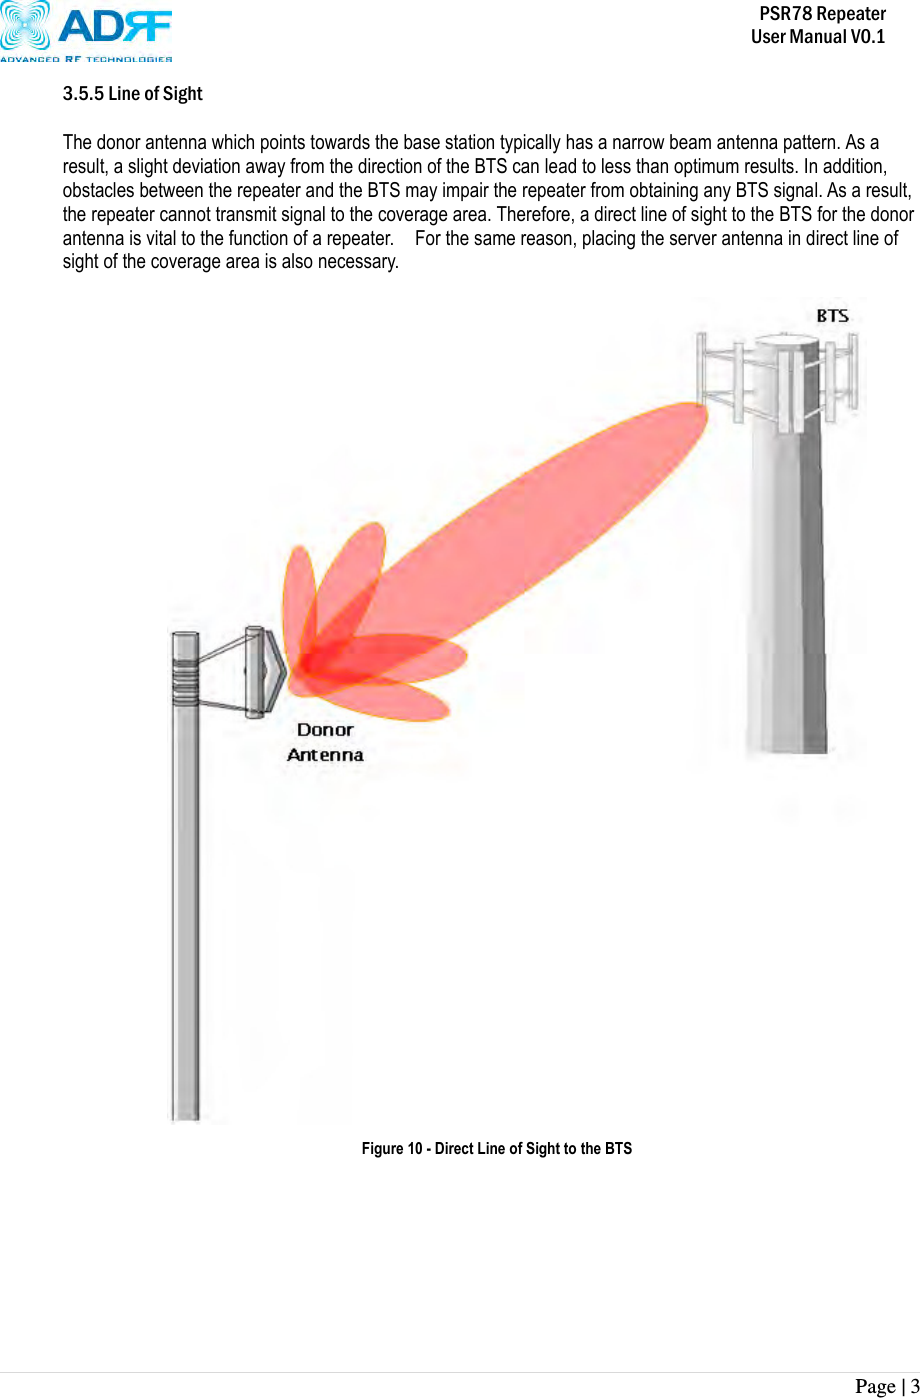           PSR78 Repeater     User Manual V0.1 Page | 3    3.5.5 Line of Sight  The donor antenna which points towards the base station typically has a narrow beam antenna pattern. As a result, a slight deviation away from the direction of the BTS can lead to less than optimum results. In addition, obstacles between the repeater and the BTS may impair the repeater from obtaining any BTS signal. As a result, the repeater cannot transmit signal to the coverage area. Therefore, a direct line of sight to the BTS for the donor antenna is vital to the function of a repeater.    For the same reason, placing the server antenna in direct line of sight of the coverage area is also necessary.       Figure 10 - Direct Line of Sight to the BTS  